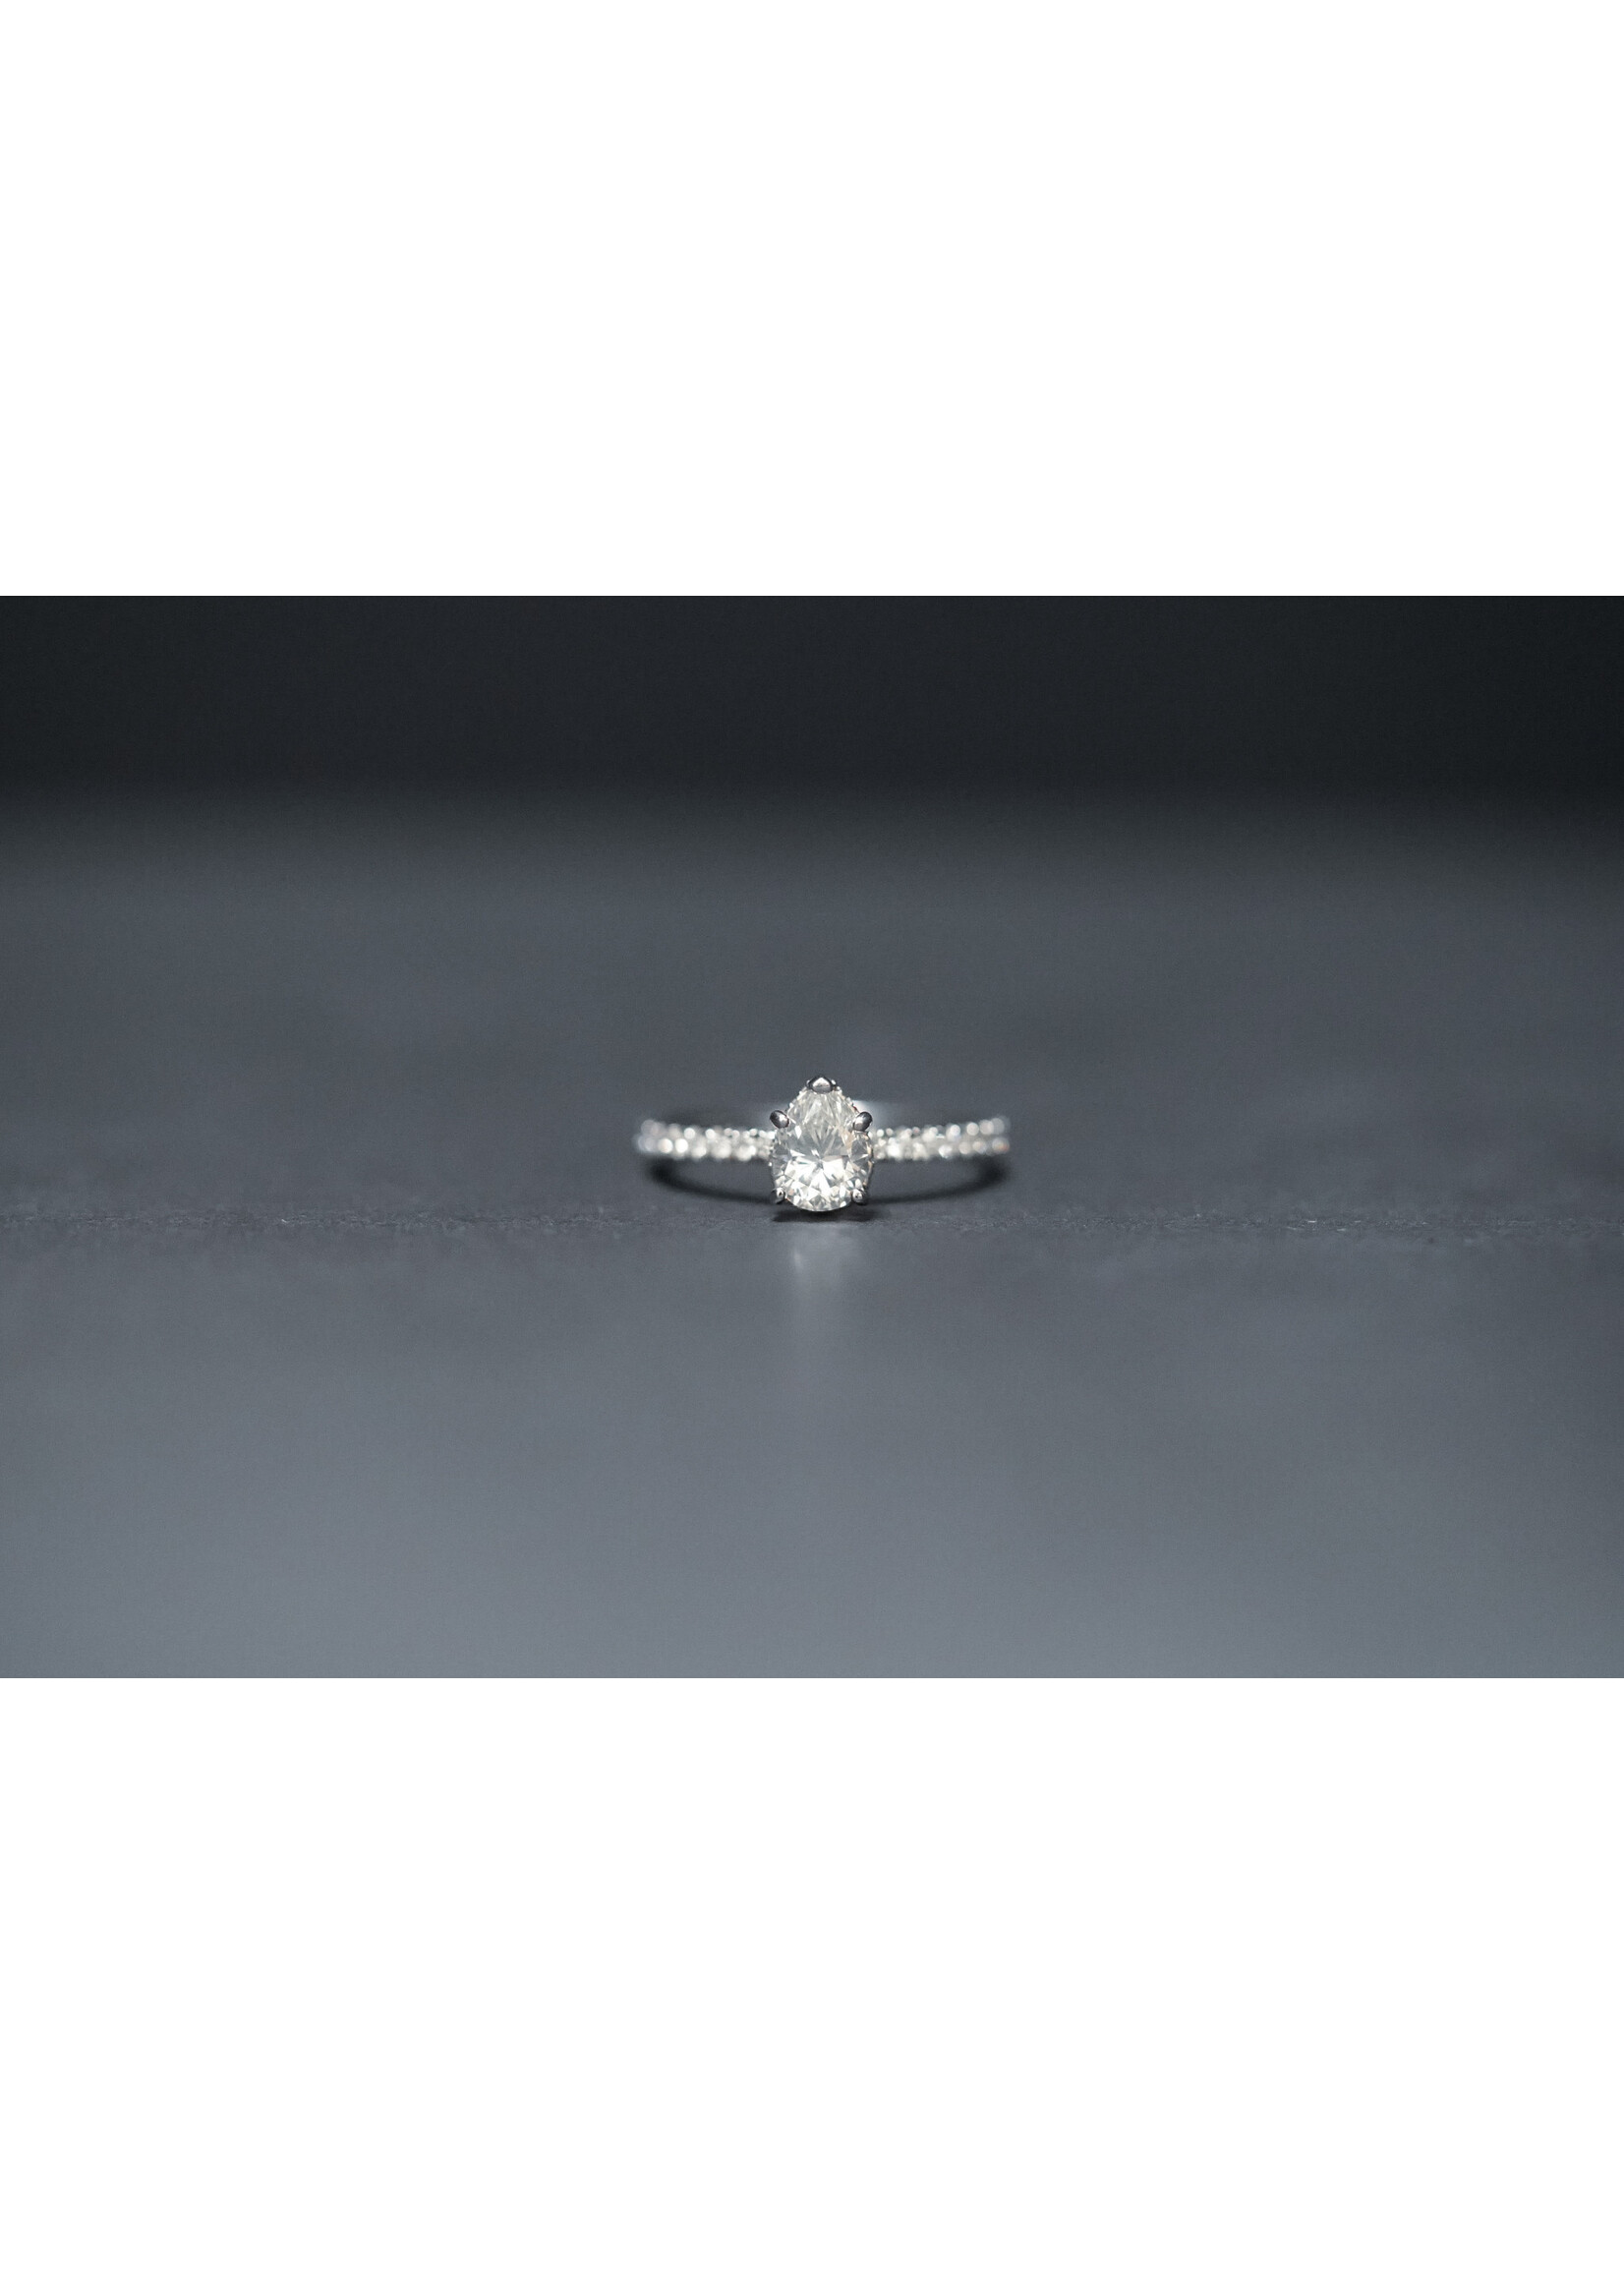 18KW 2.19g 1.08ctw (.75ctr) I/SI2 Pear Hidden Halo Engagement Ring (size 6.5)